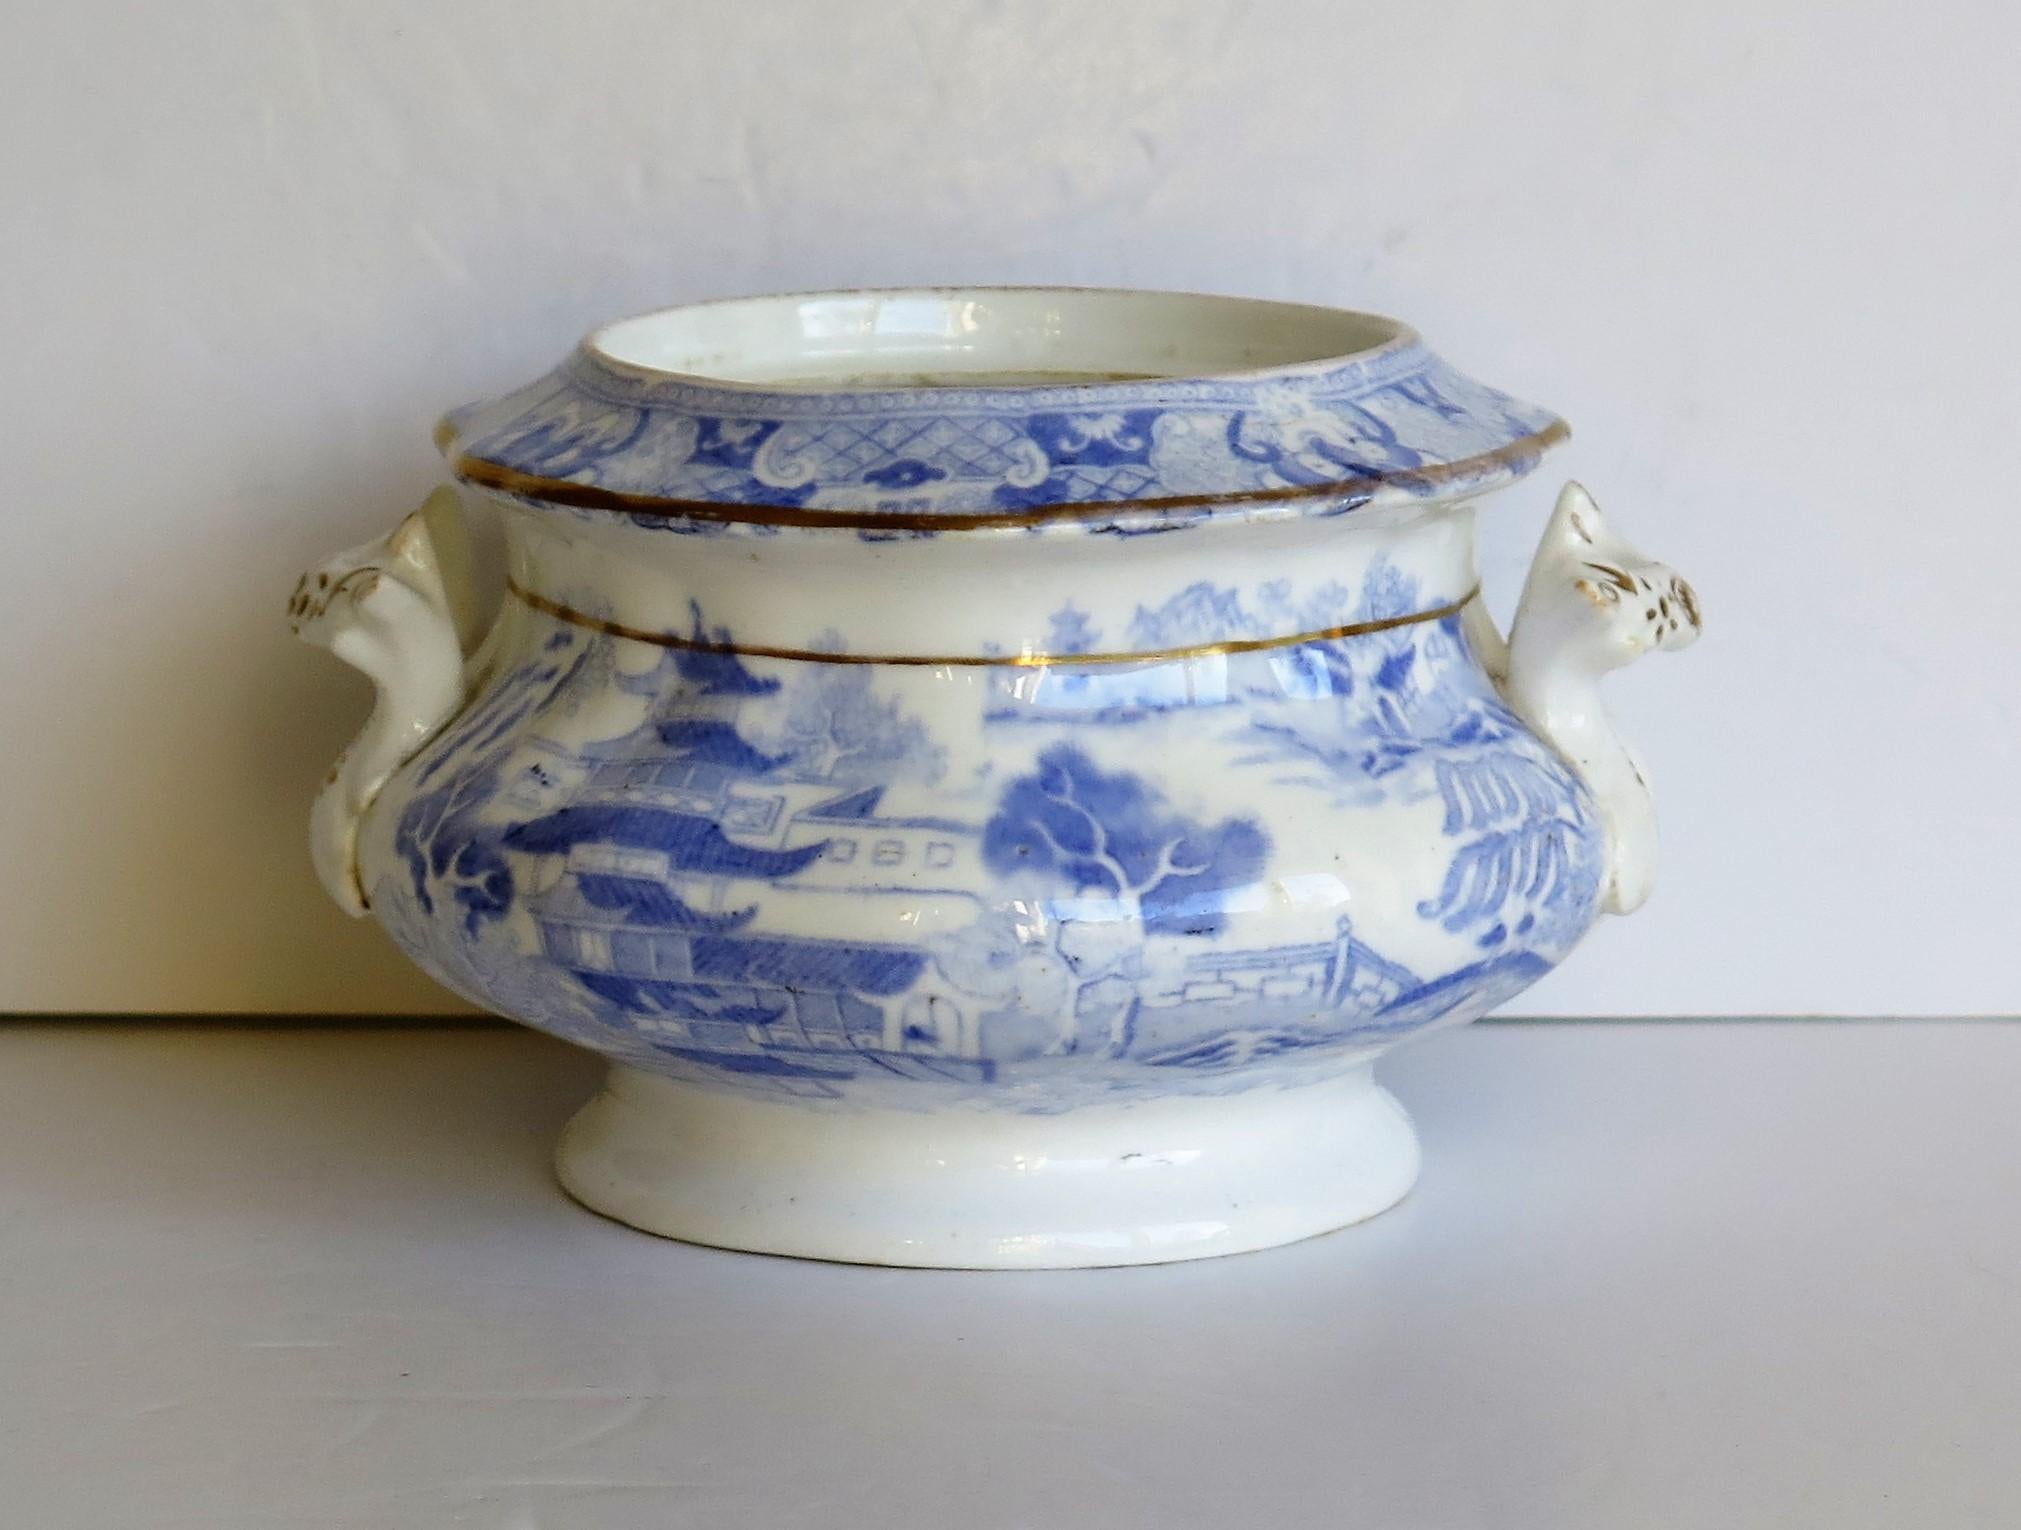 This is a porcelain blue and white, hand gilded Sucrier (Sugar Bowl) in the Broseley printed pattern made by Miles Mason (Mason's), Staffordshire Potteries, in the early 19th century, circa 1810.

This piece is well potted with a lovely shape and